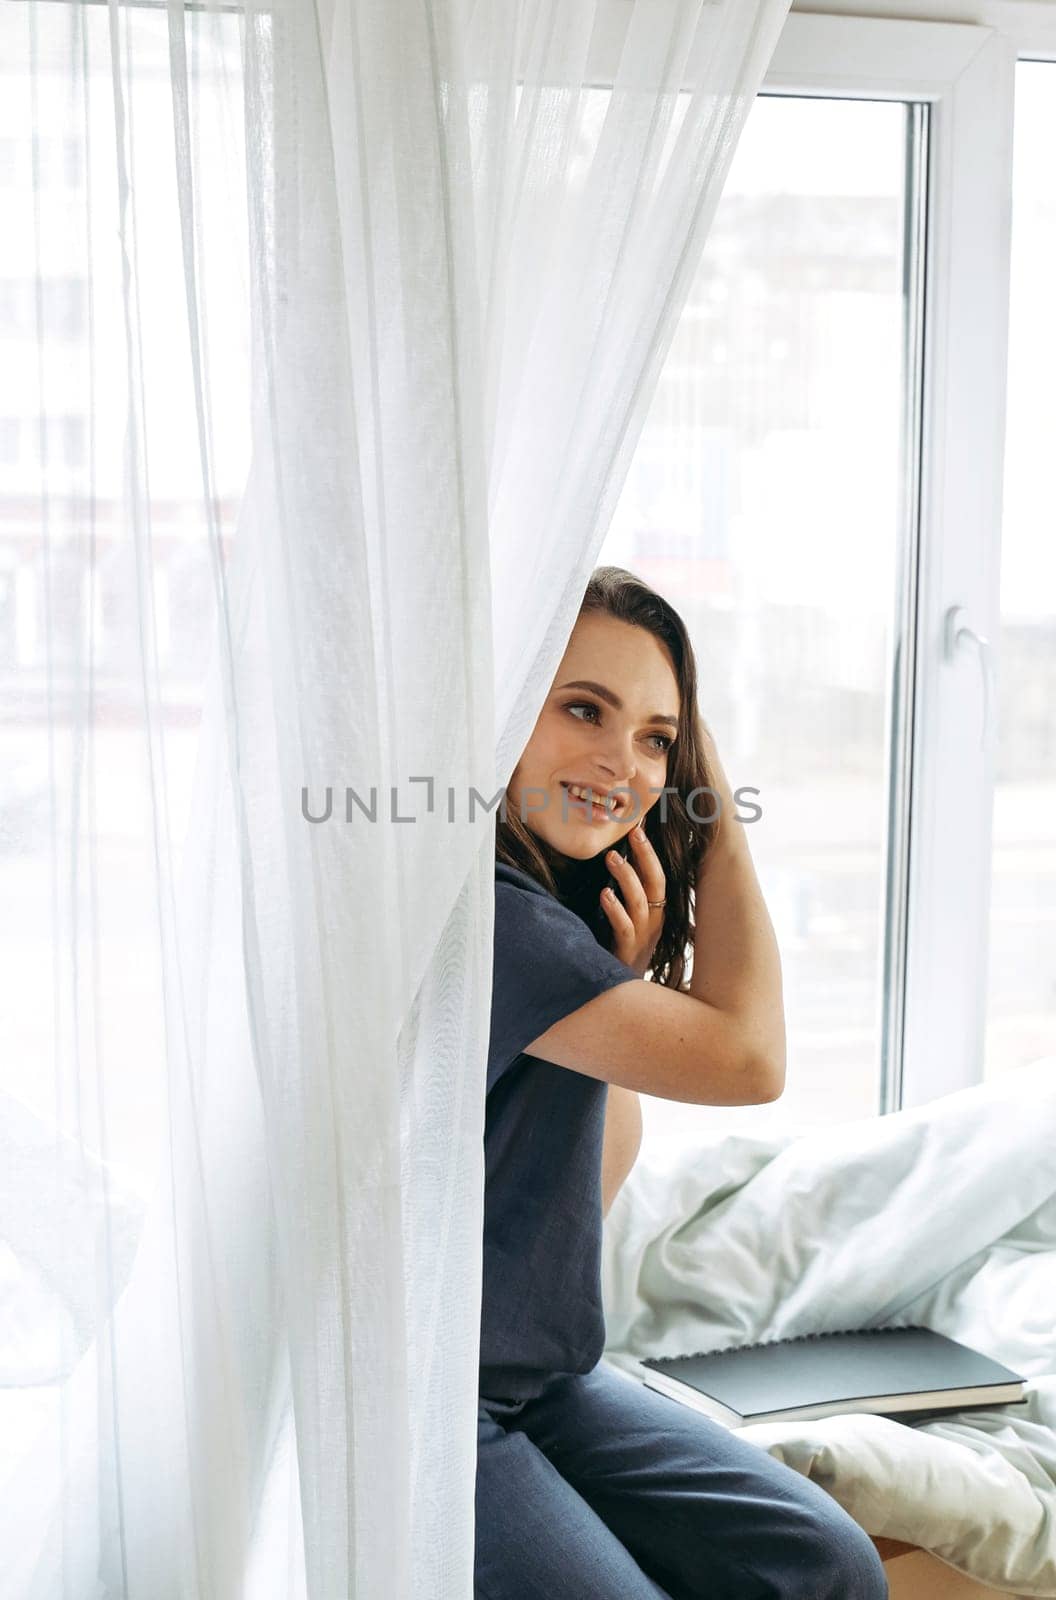 Young woman sitting on the windowsill talking on the phone. Vertical frame.